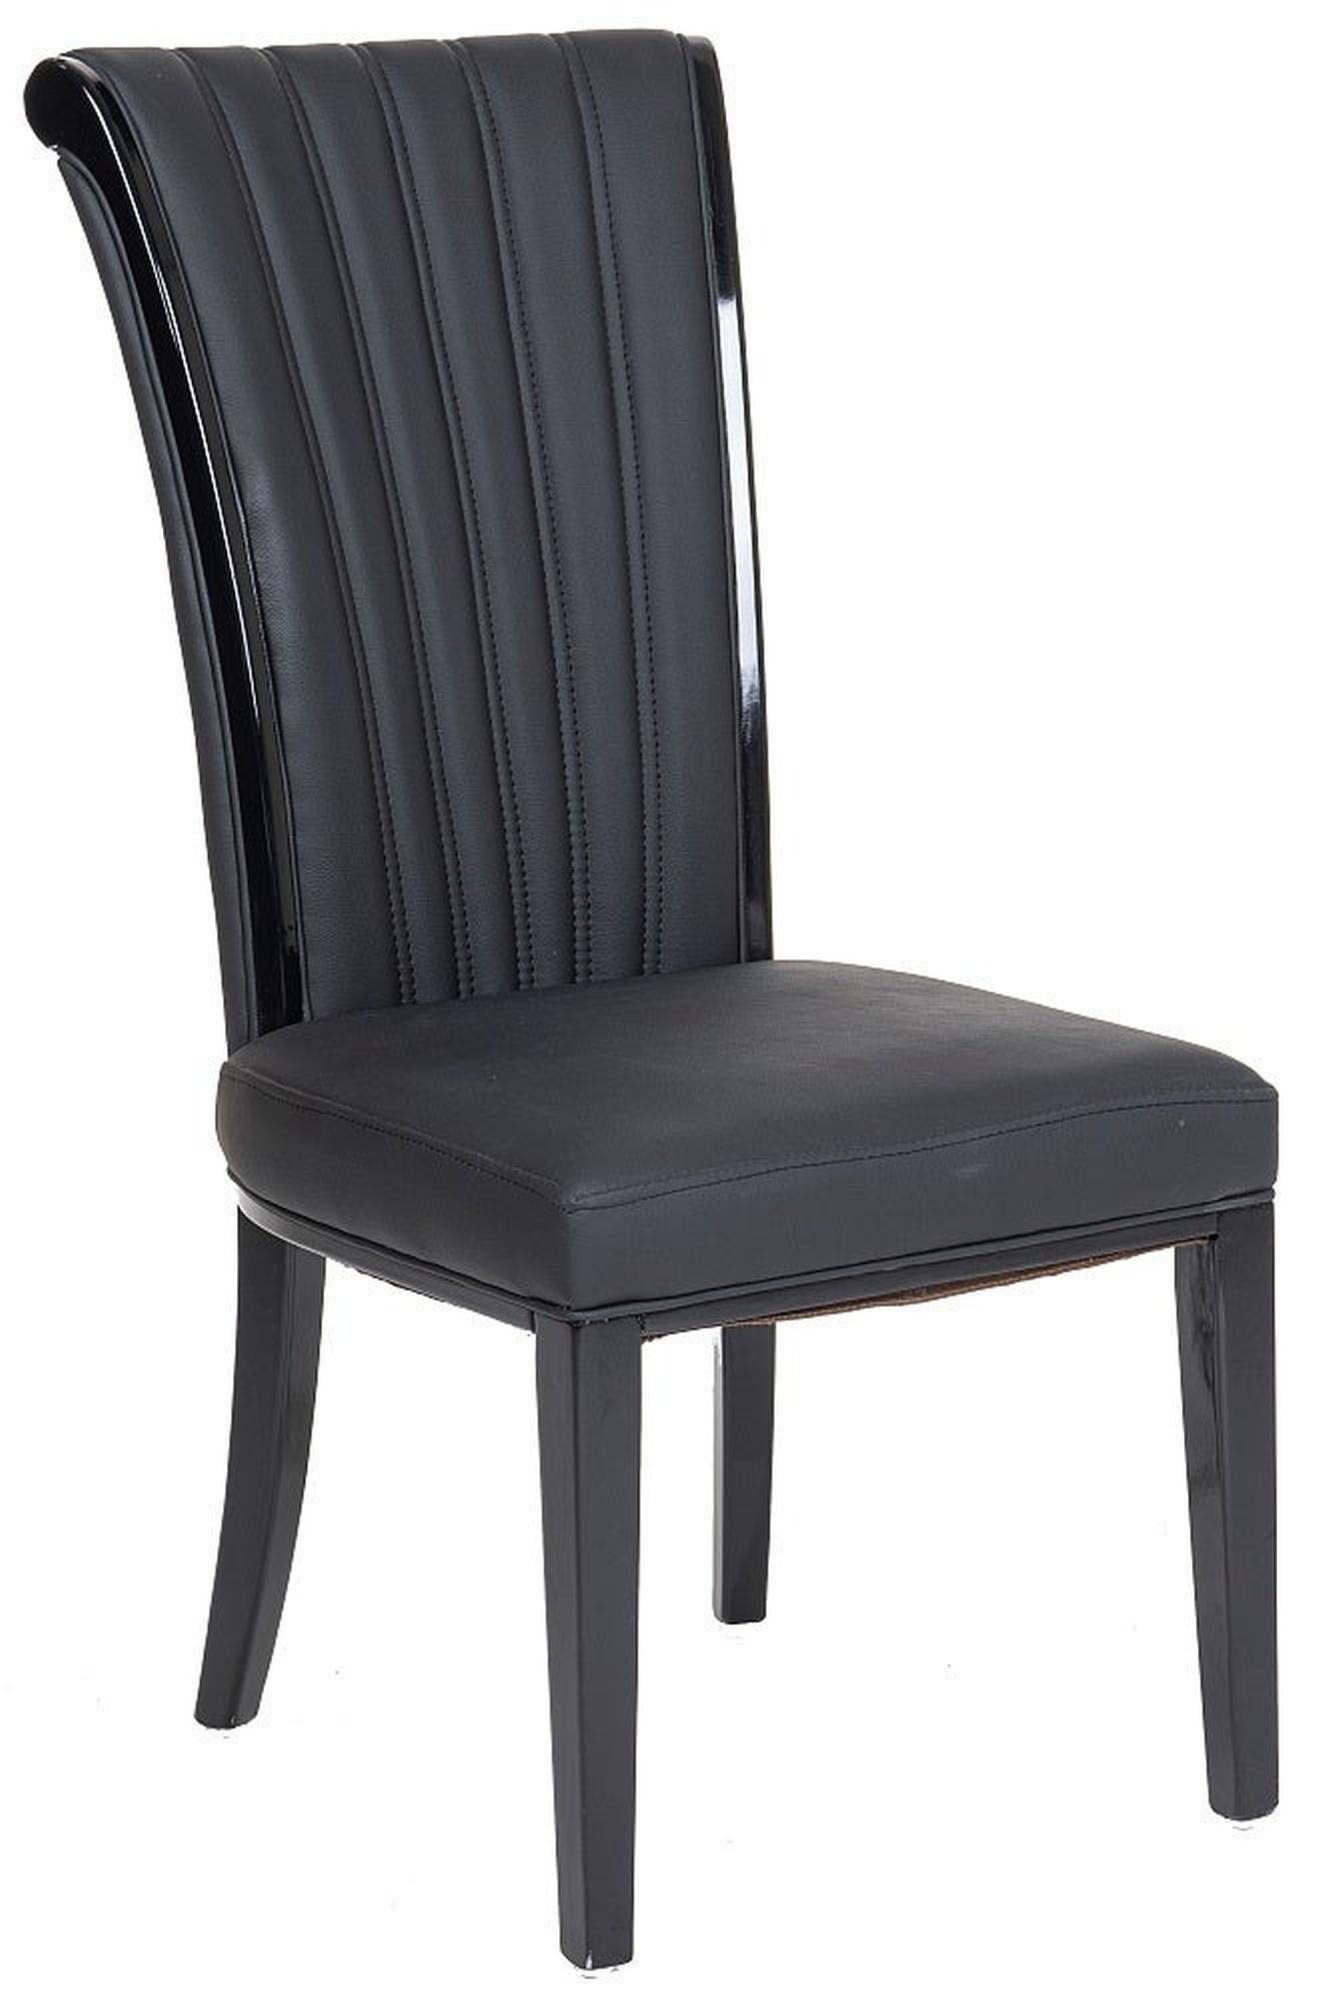 Cadiz Black Dining Chair, Leather - Faux PU with Black Legs and High Gloss Side Trims